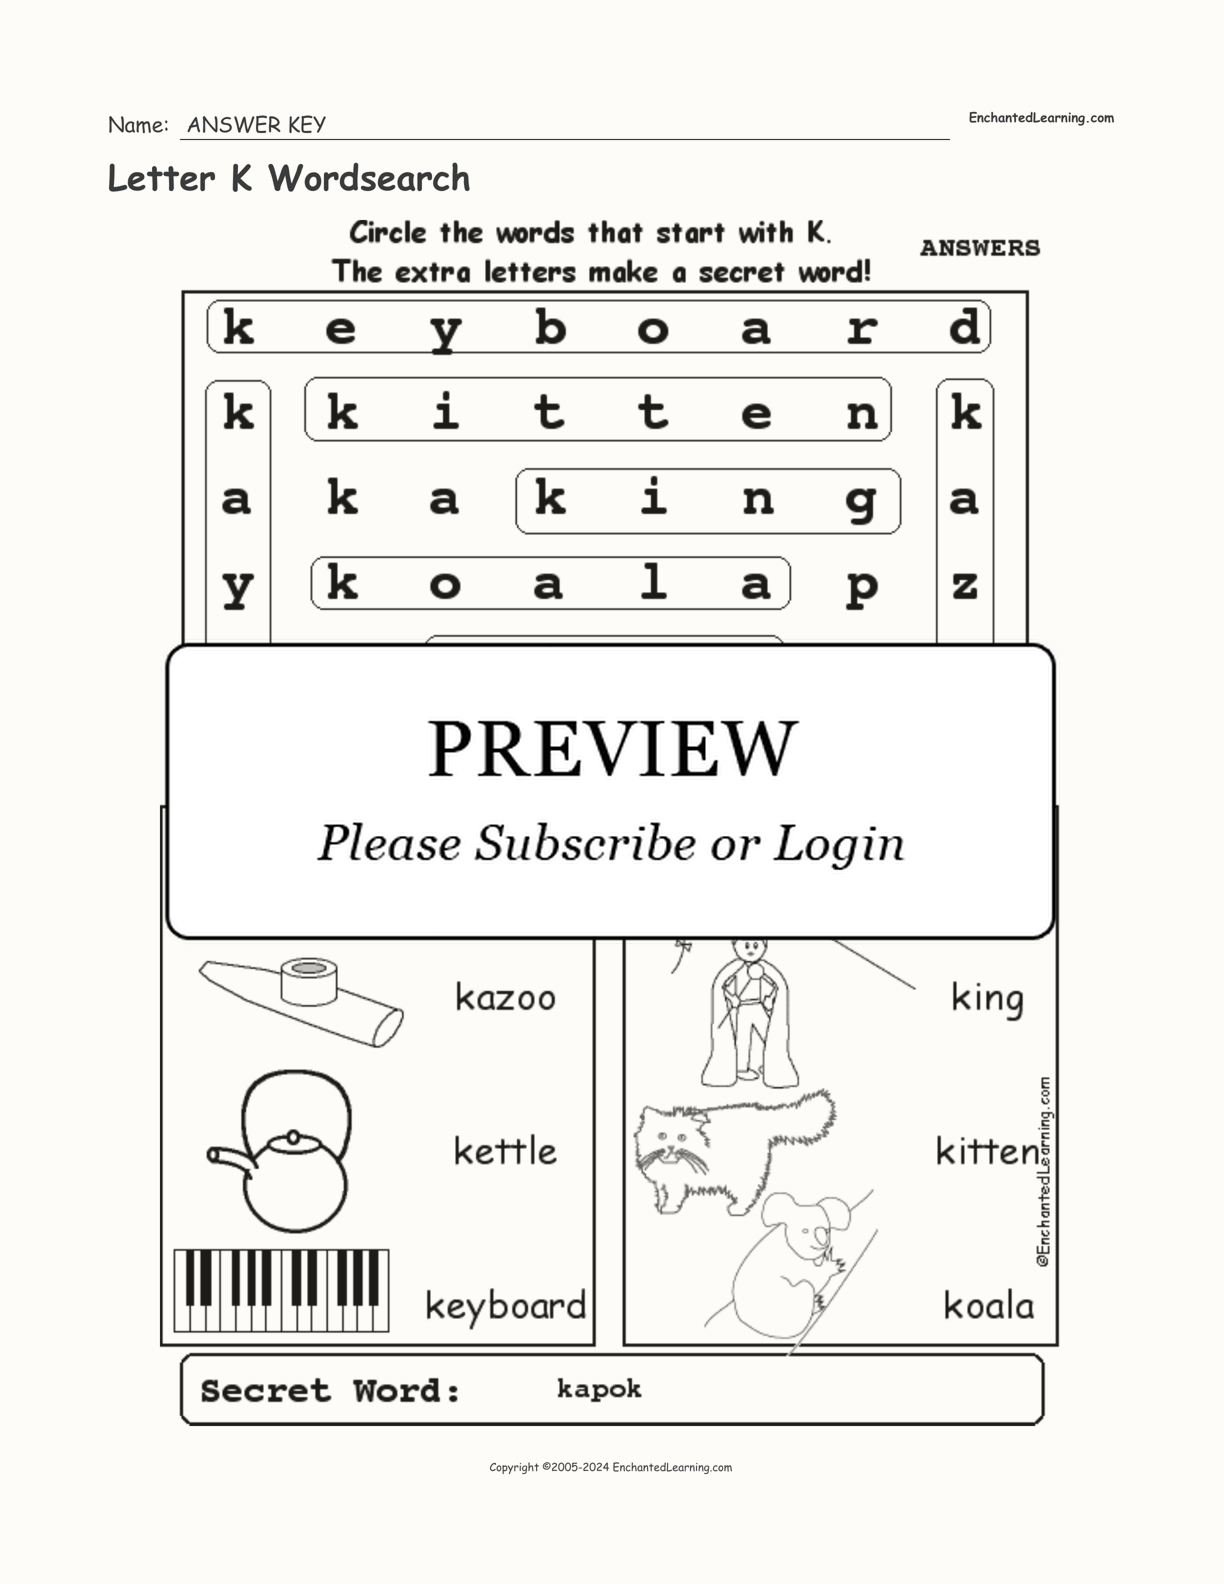 Letter K Wordsearch interactive worksheet page 2